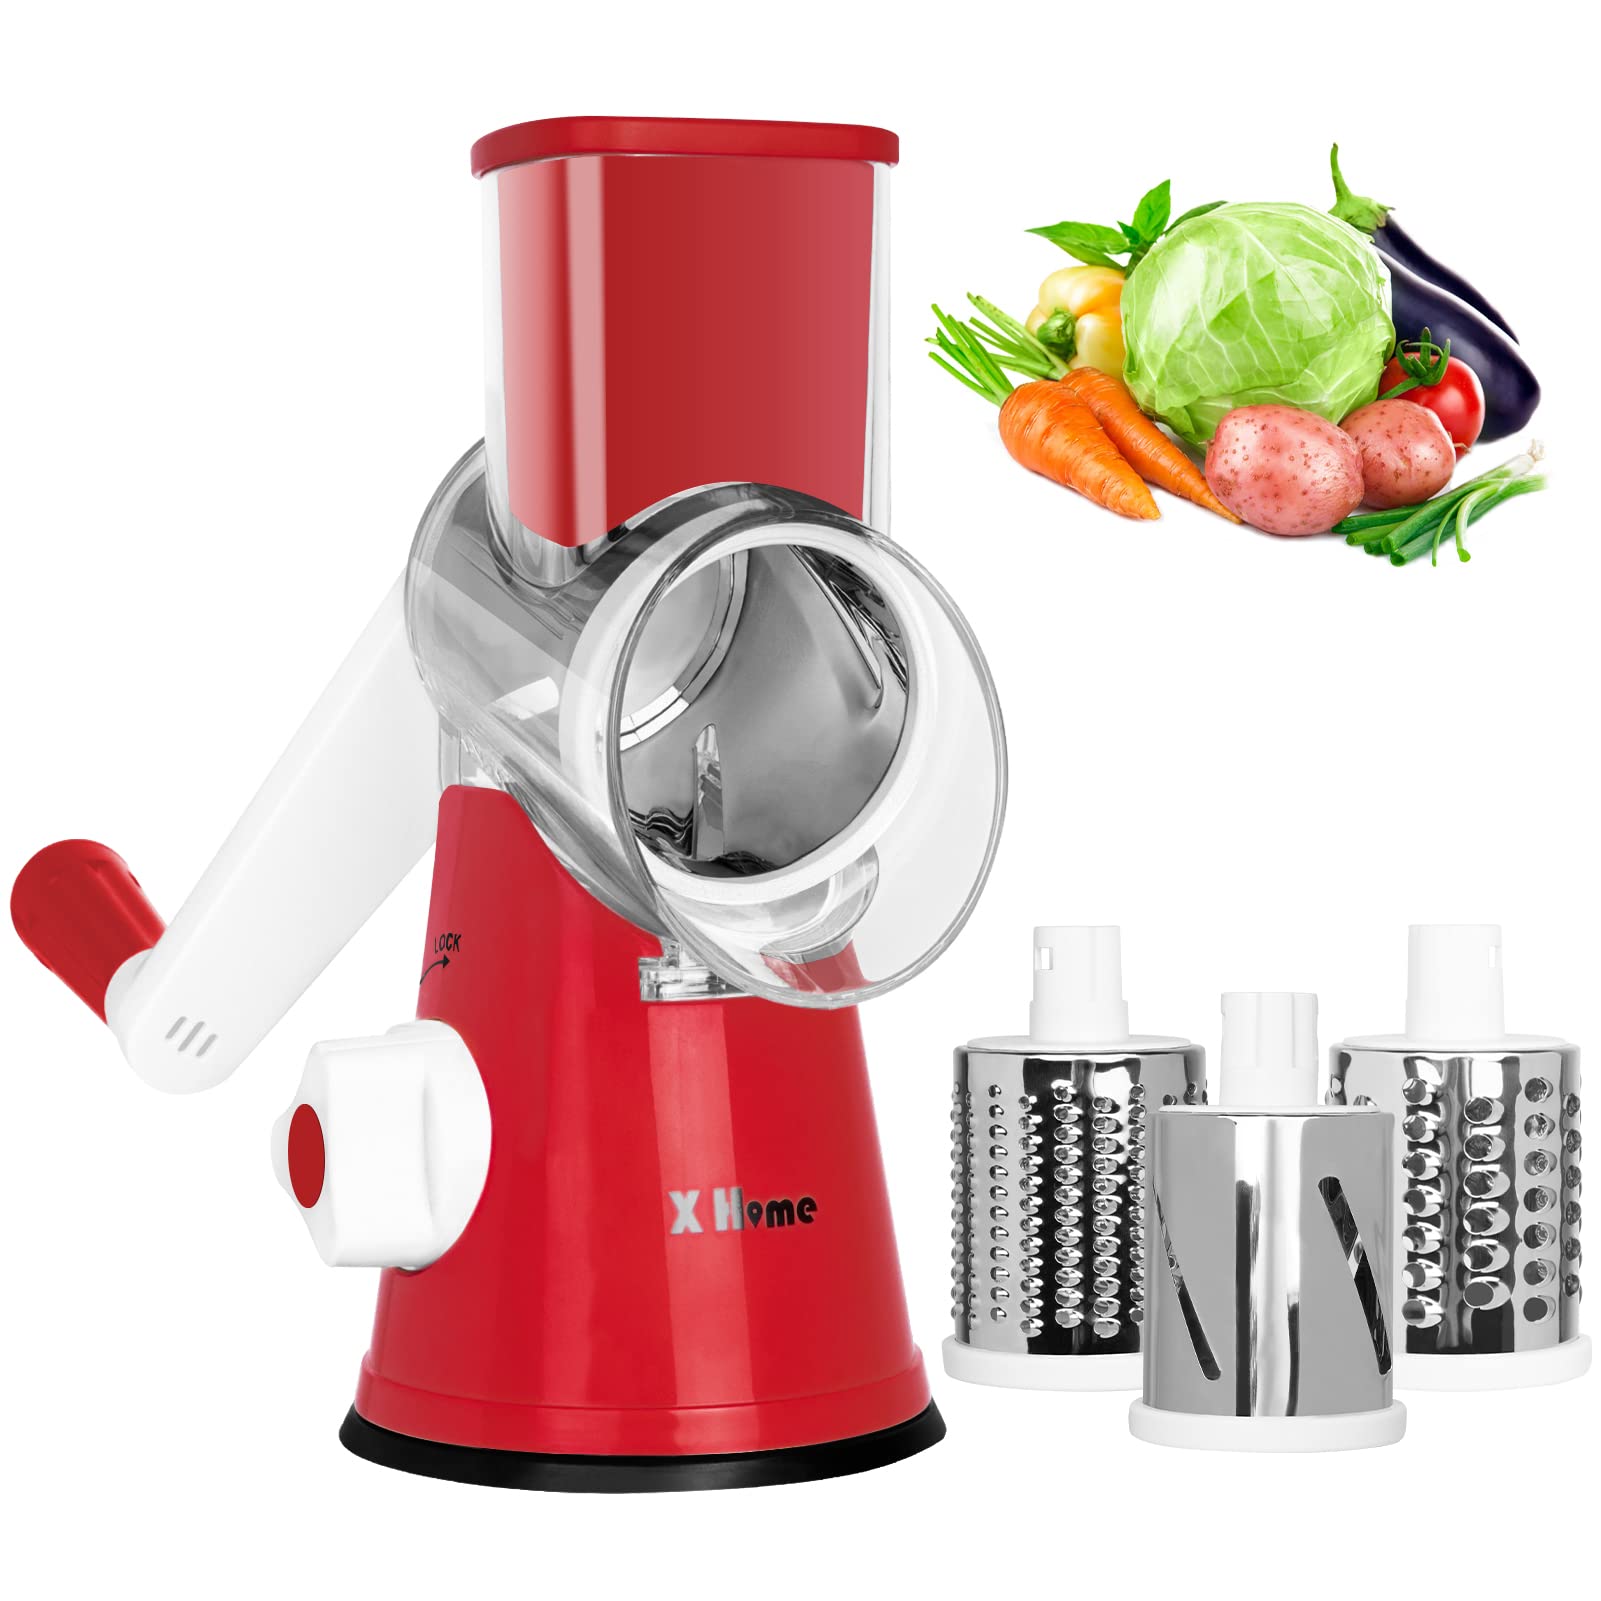 X Home Rotary Cheese Grater, Handheld Vegetables Slicer Cheese Shredder with Rubber Suction Base, 3 Stainless Drum Blades Included, Red